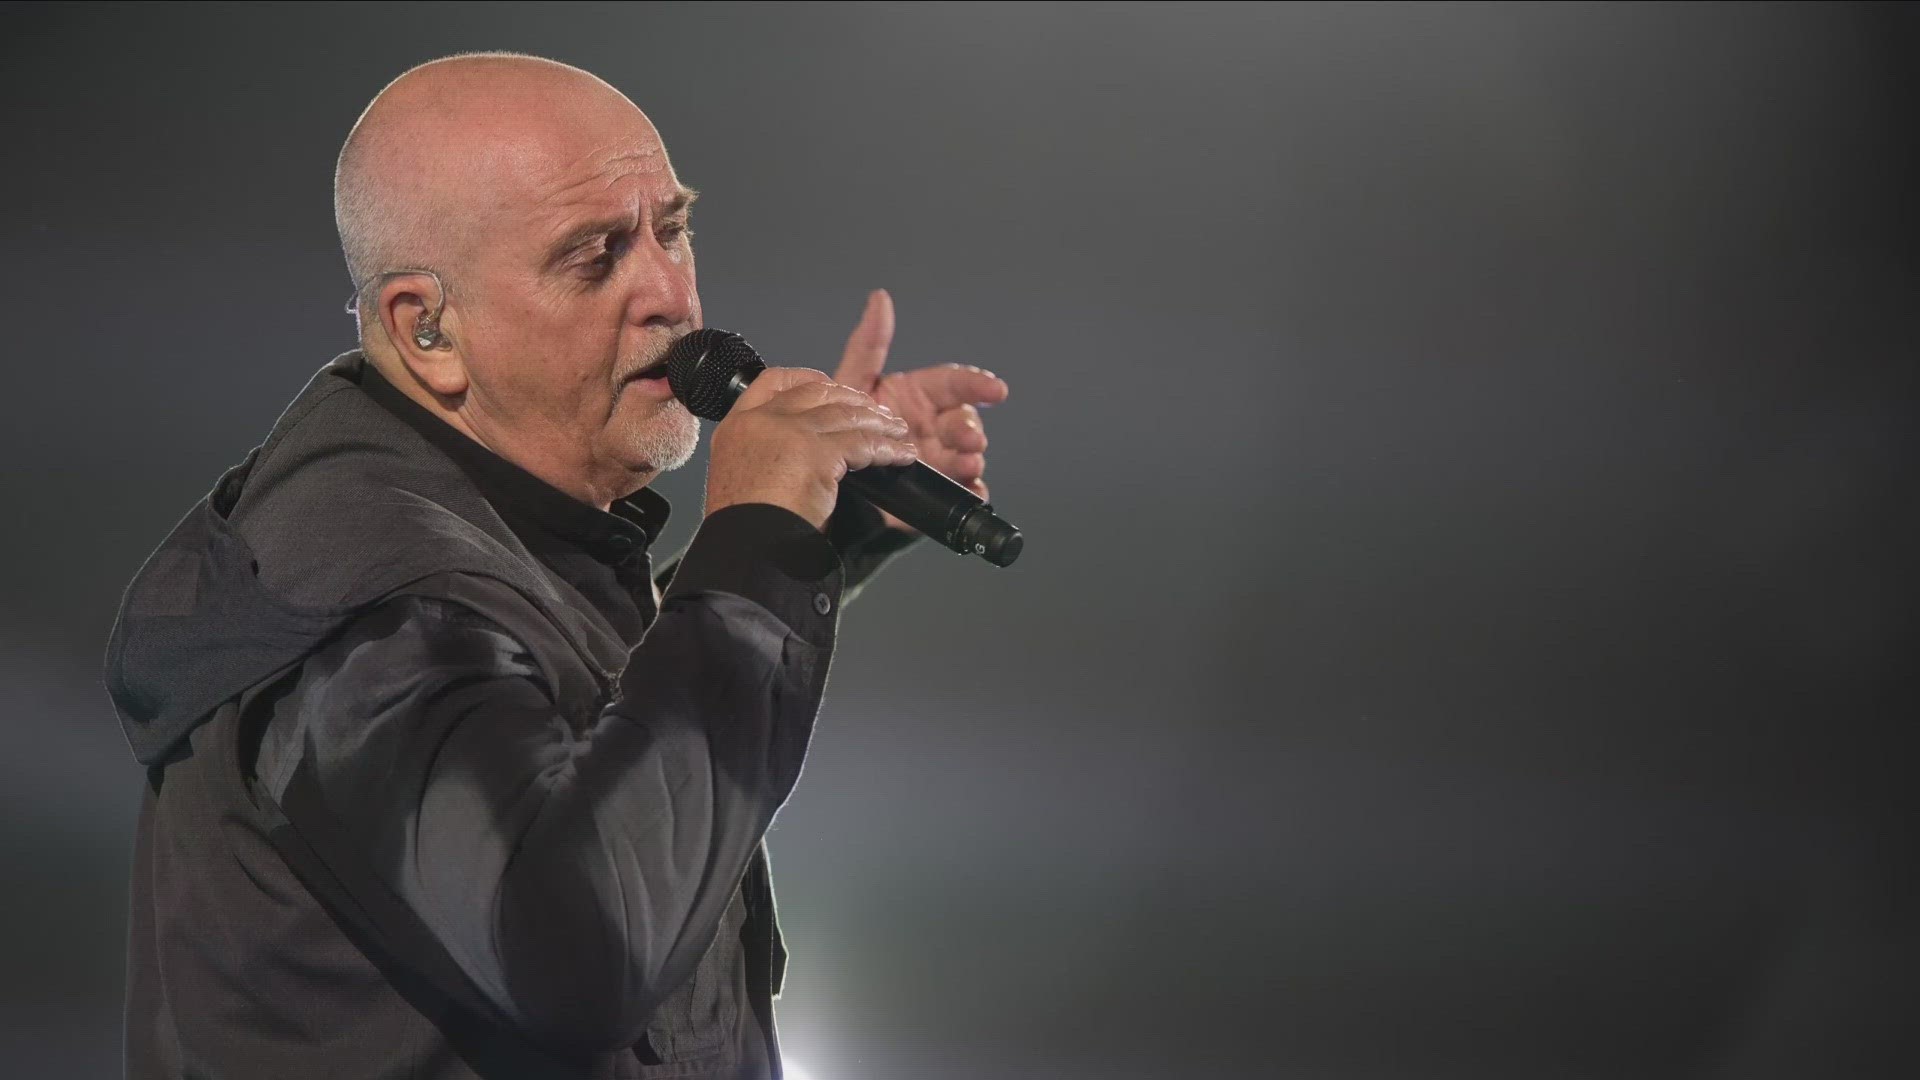 Peter Gabriel is coming to Western New York this fall